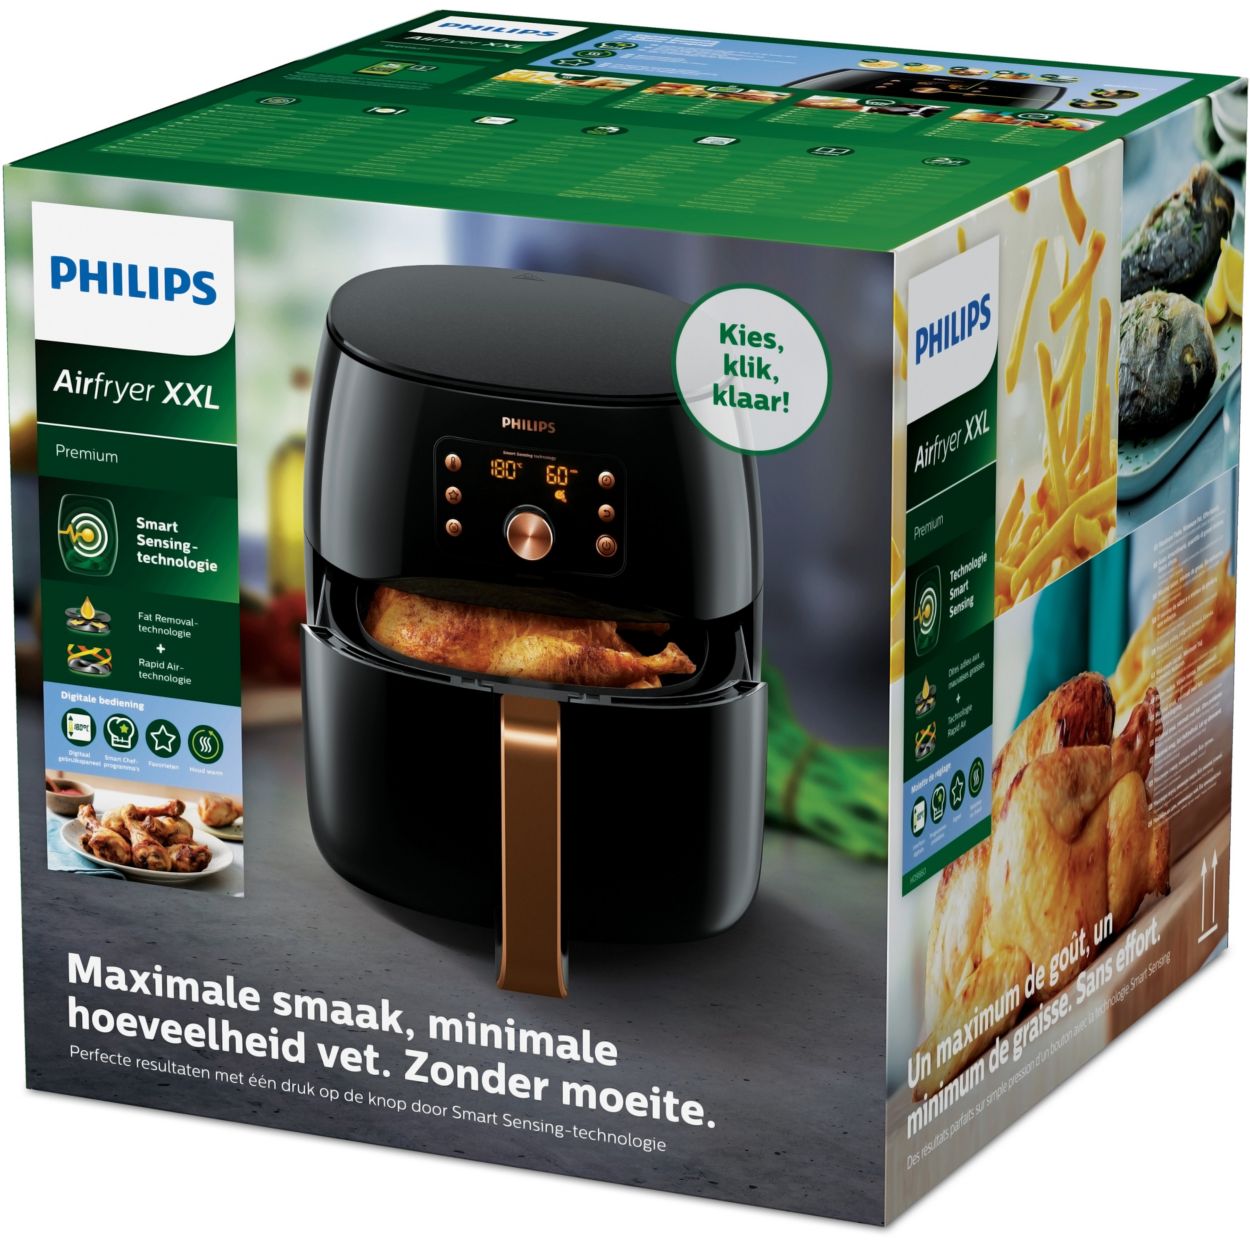 https://images.philips.com/is/image/philipsconsumer/00f96bdf88414778a5baad1e00d2d31f?$jpglarge$&wid=1250